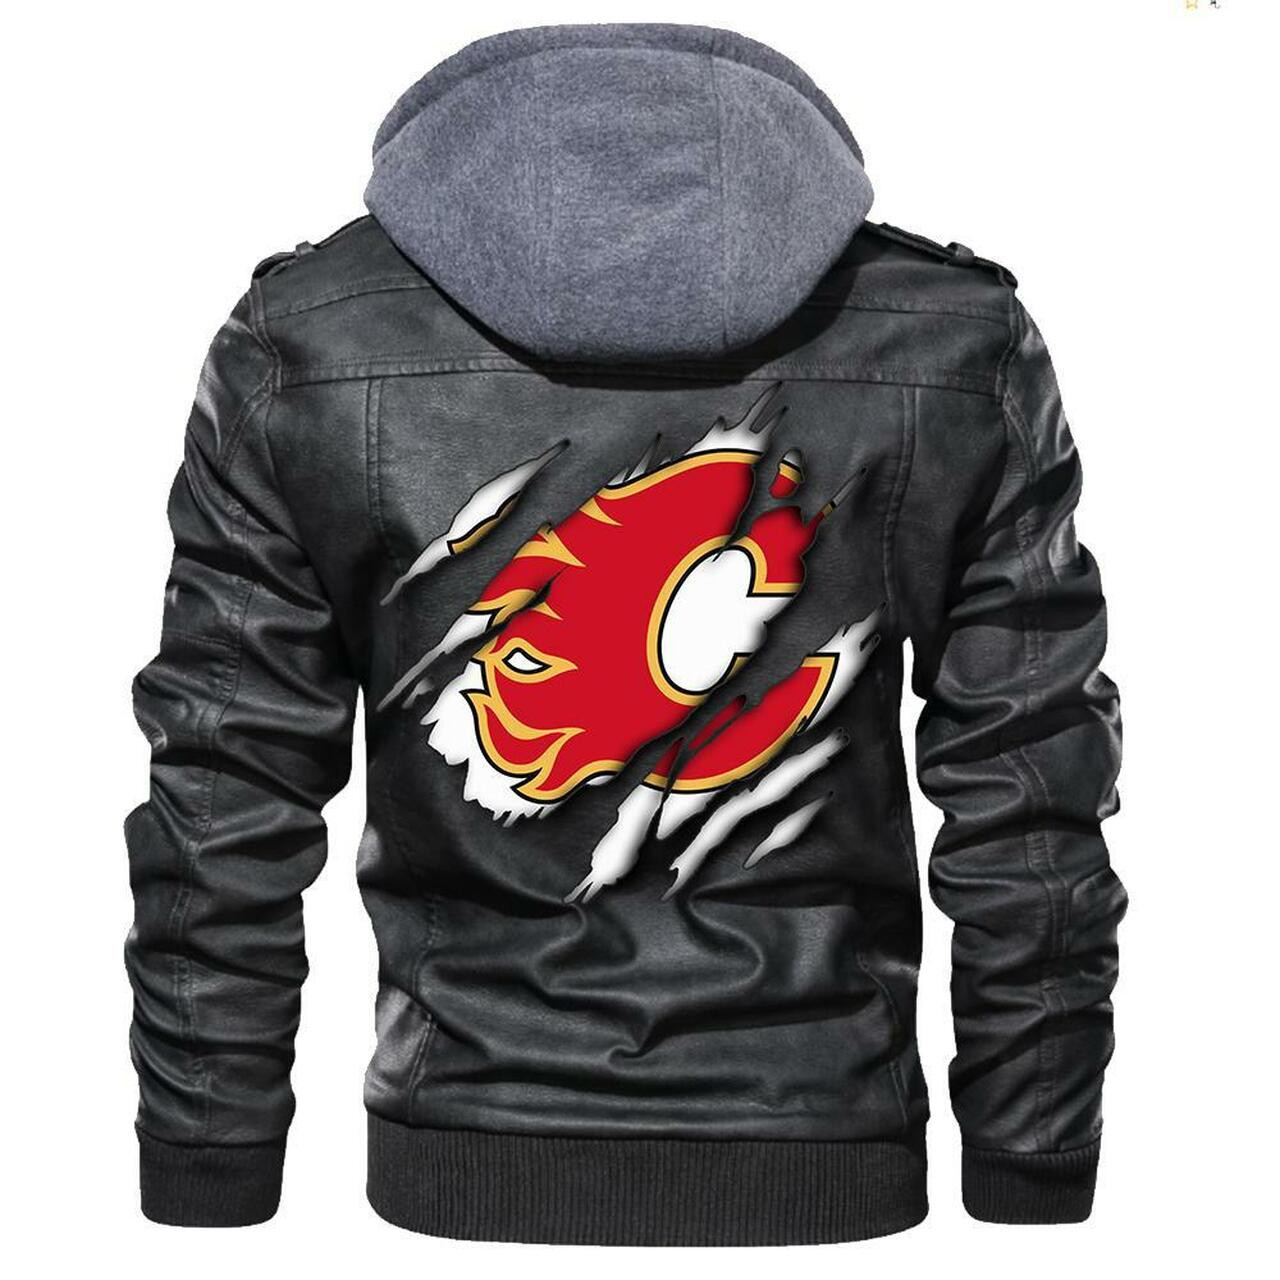 Check out and find the right leather jacket below 307